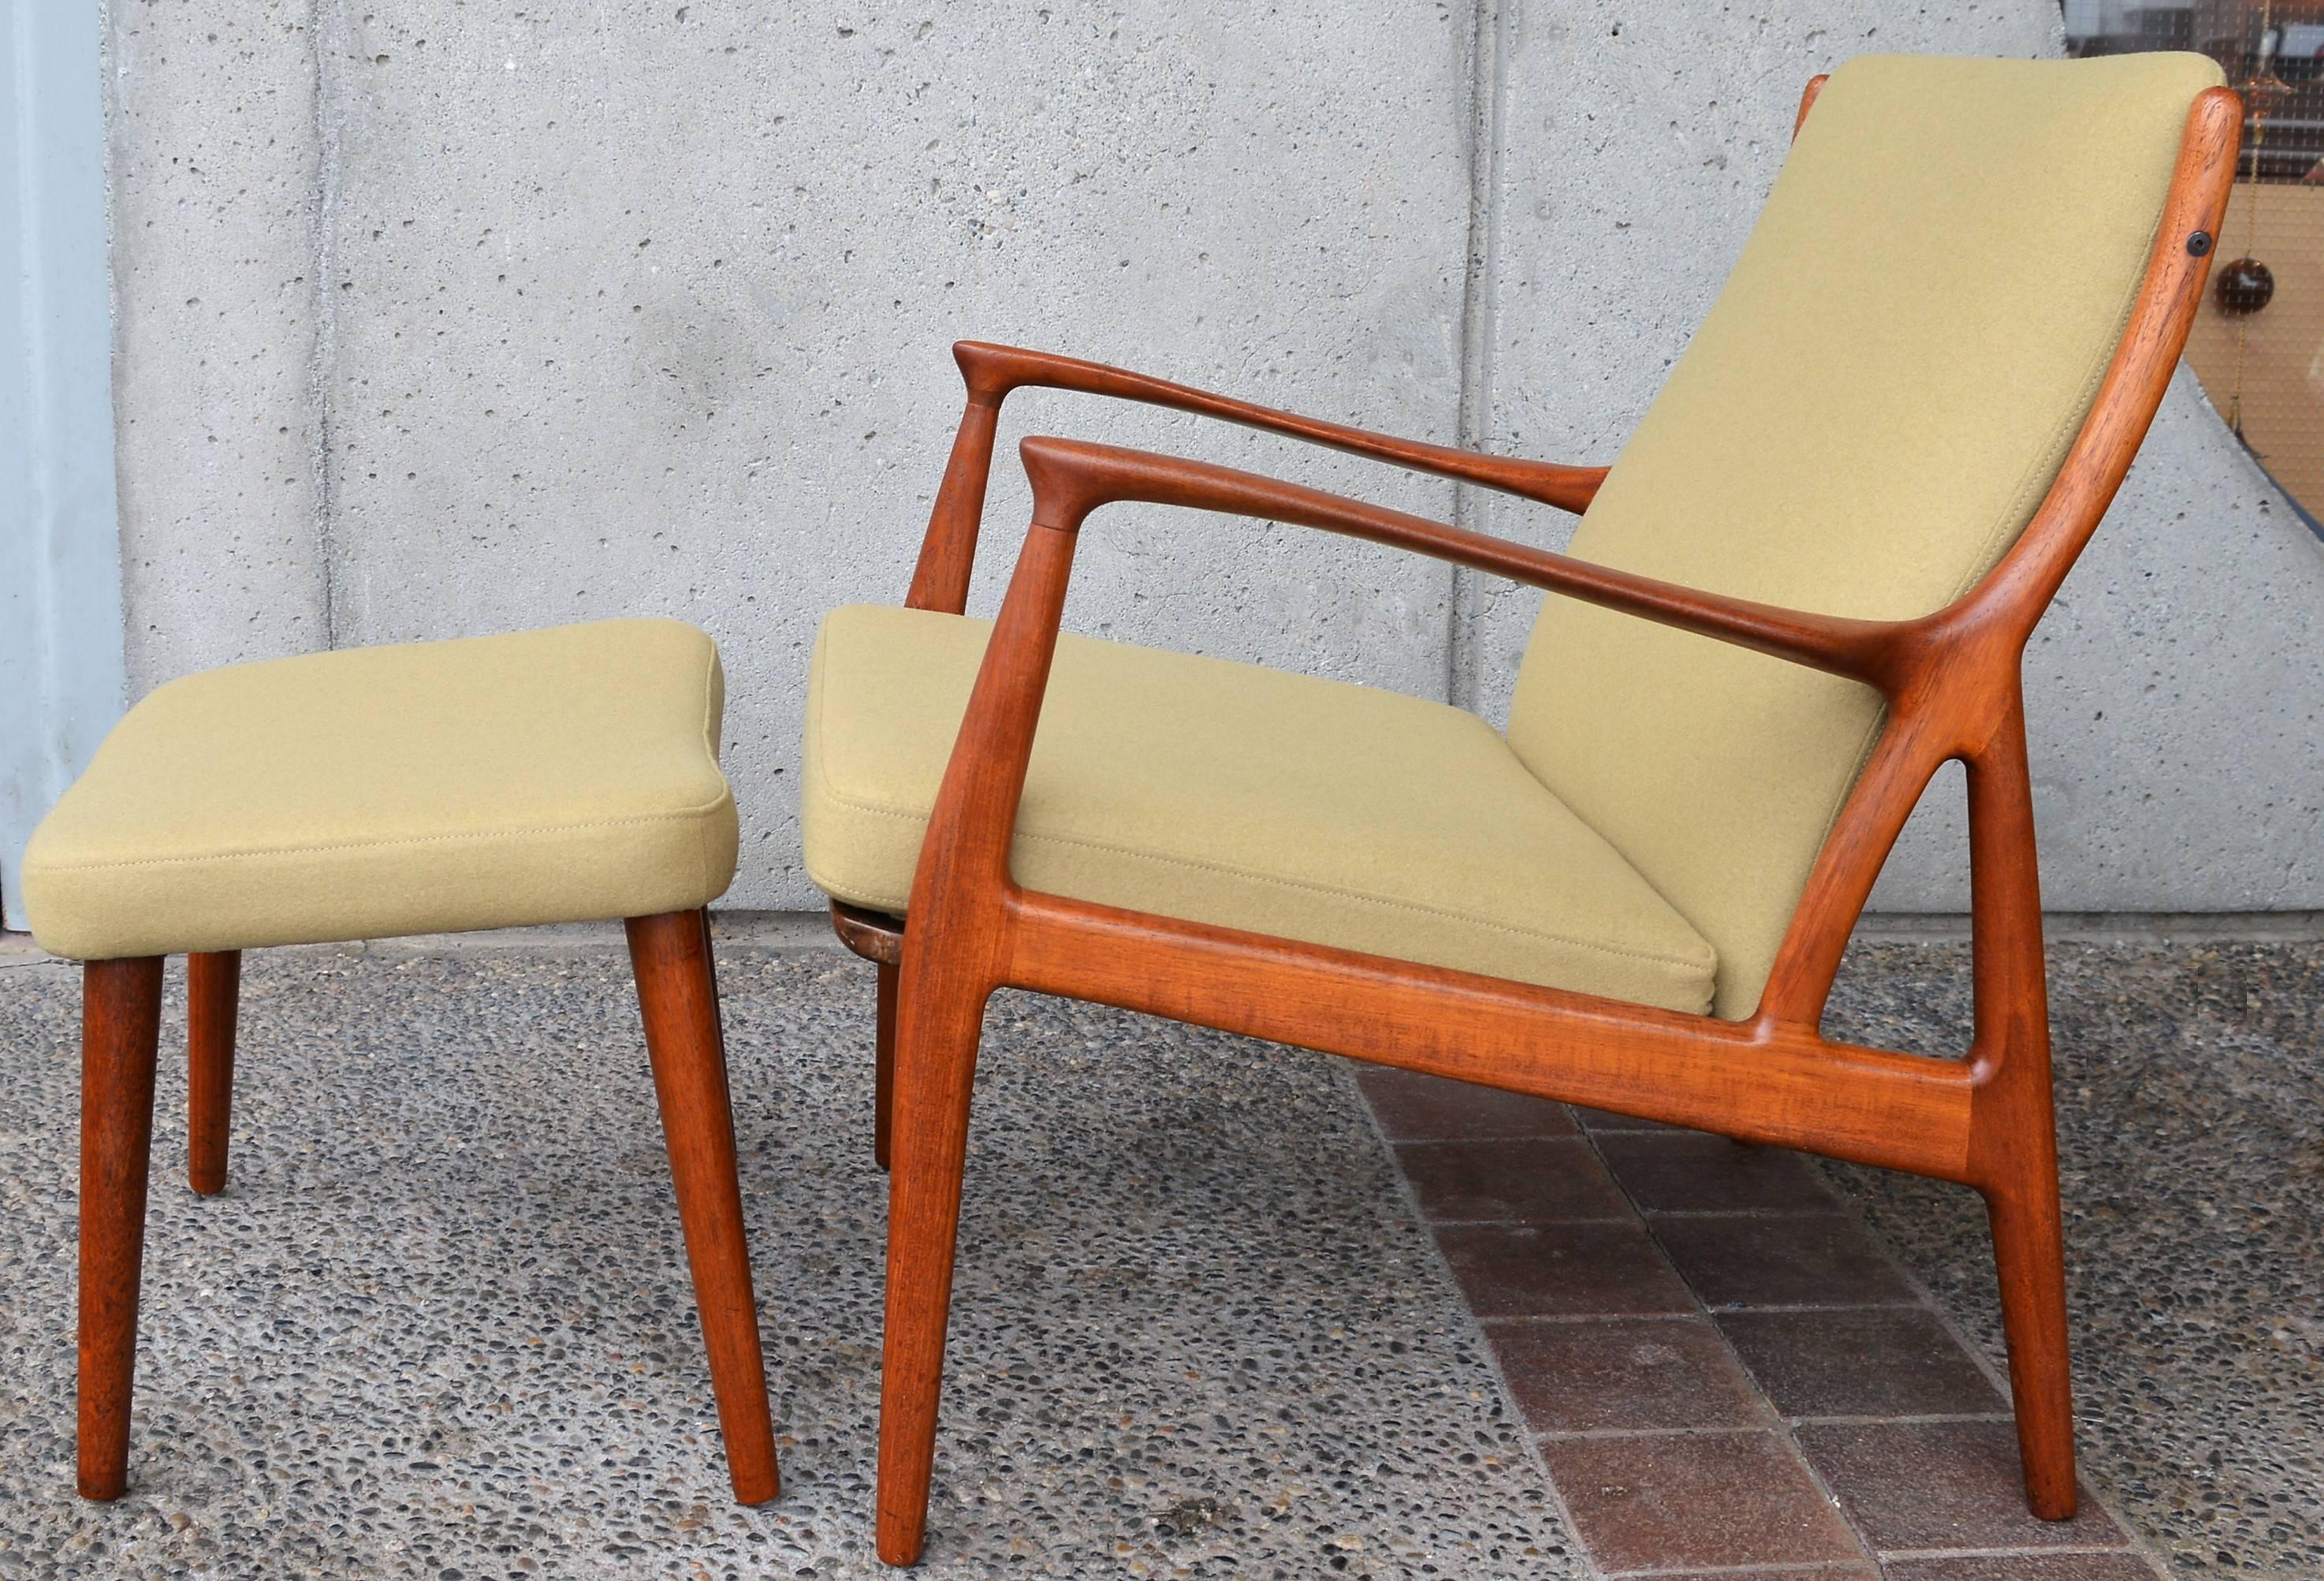 This amazing sculptural beauty has been completely restored and reupholstered with latex foam and to the correct original styling with the loose seat cushion floating atop the sprung wood framed seat deck. Designed in the 1960s in Denmark by Erik